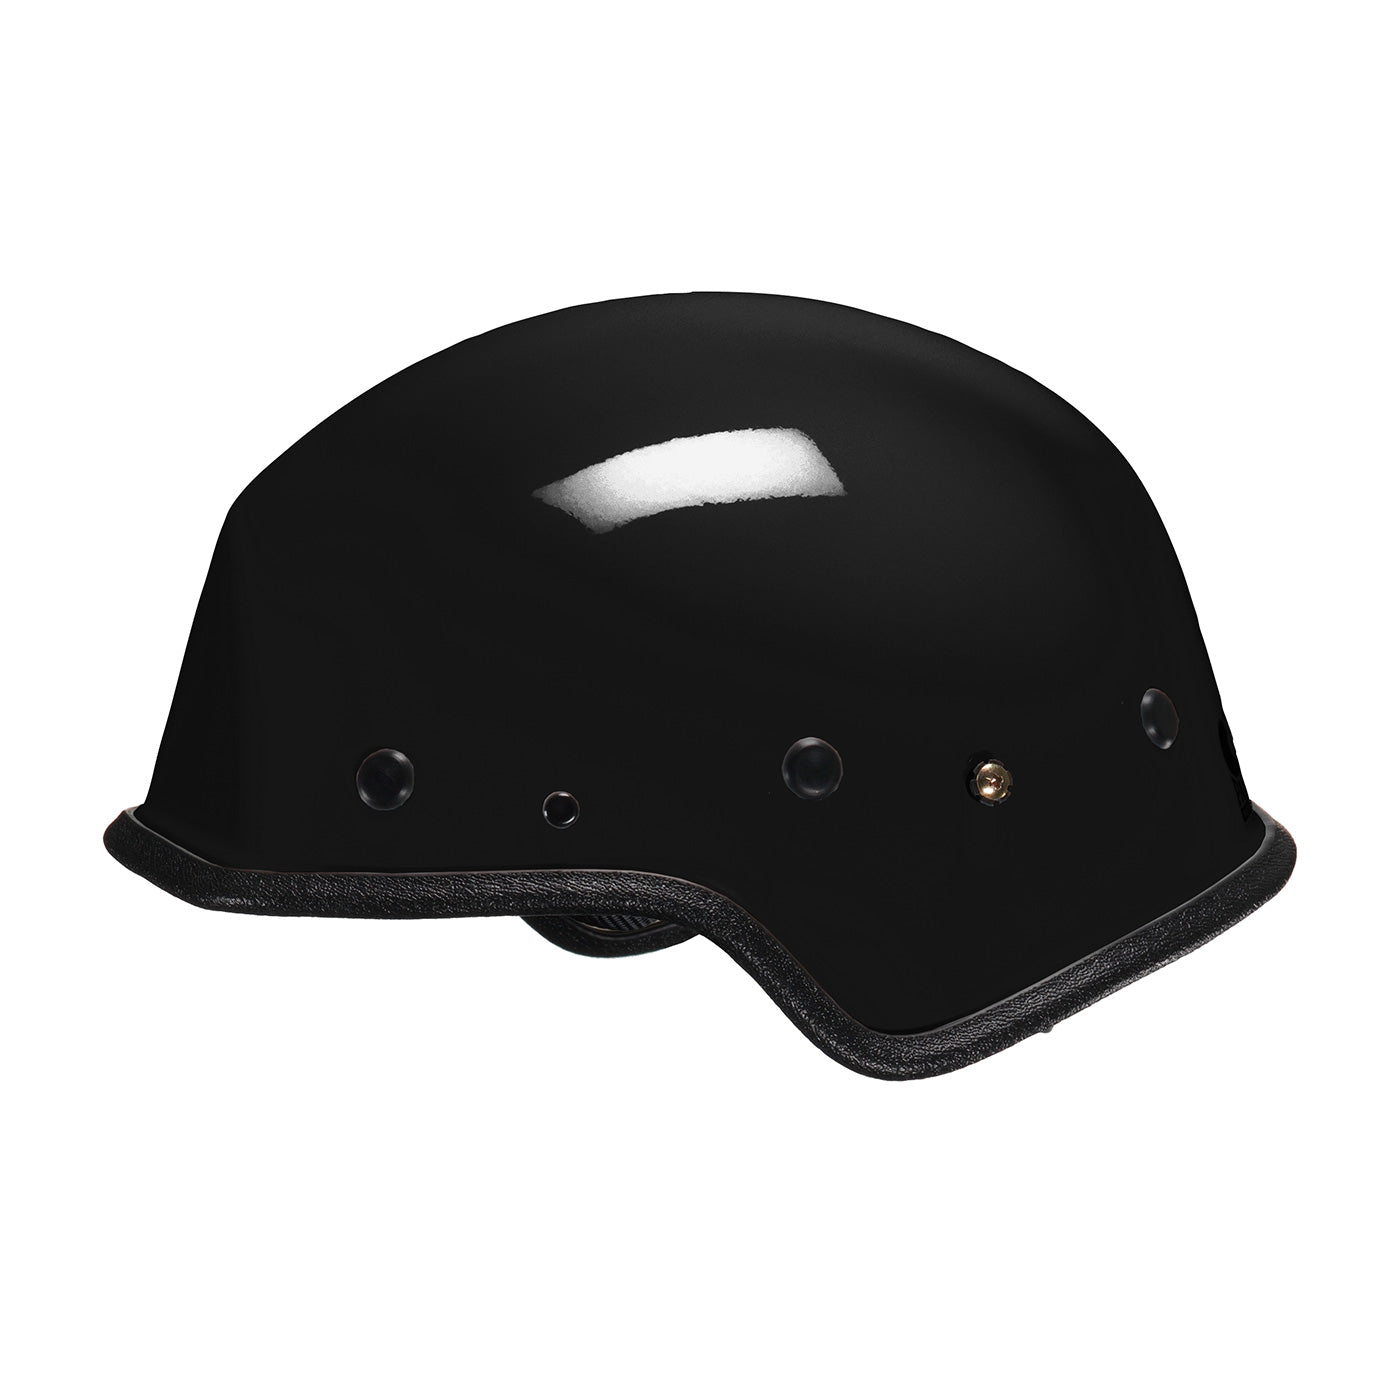 R7H Rescue Helmet with ESS Goggle Mounts